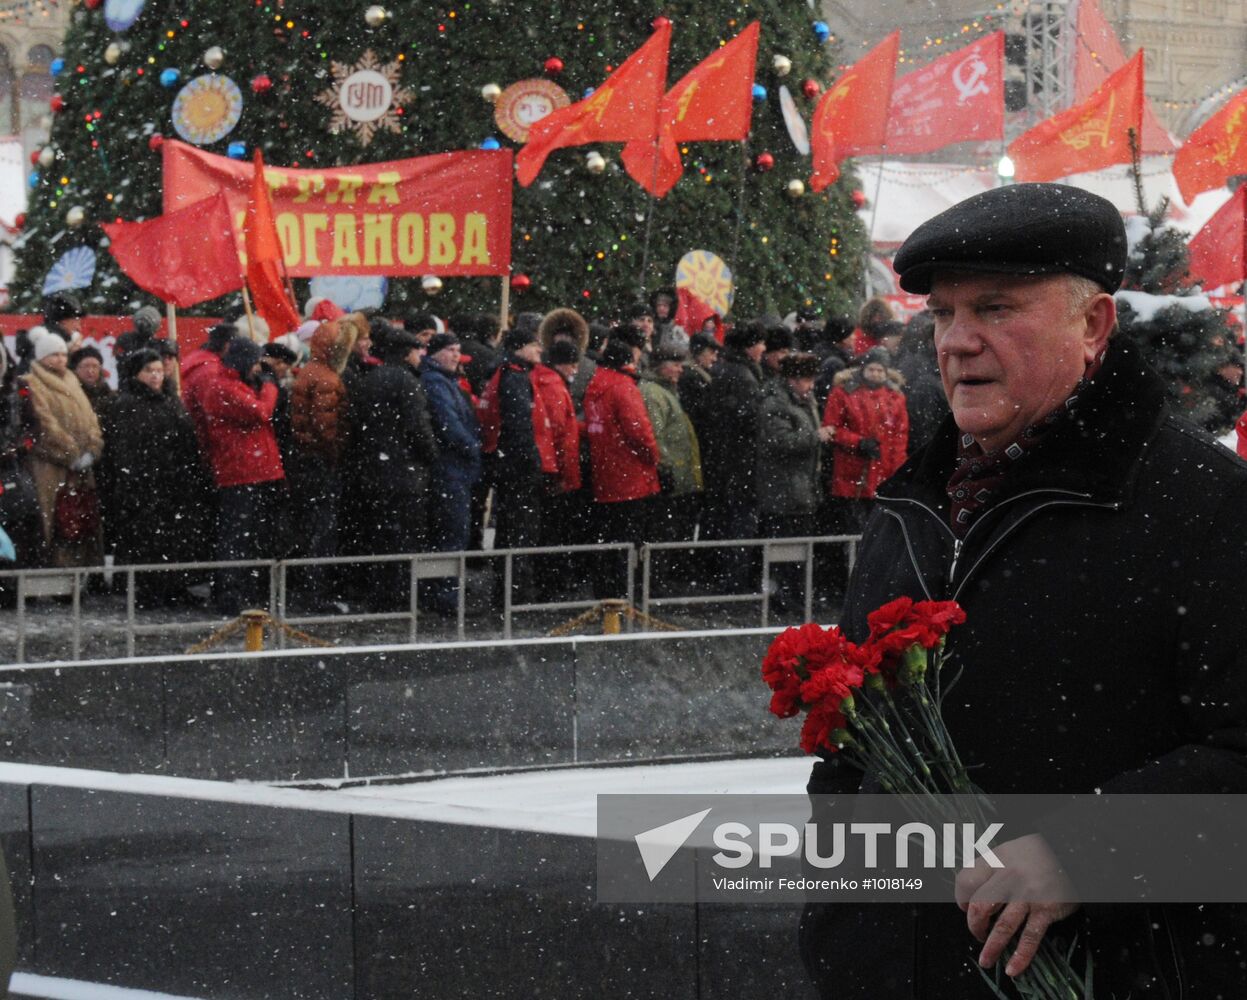 Laying flowers to Lenin's Mausoleum